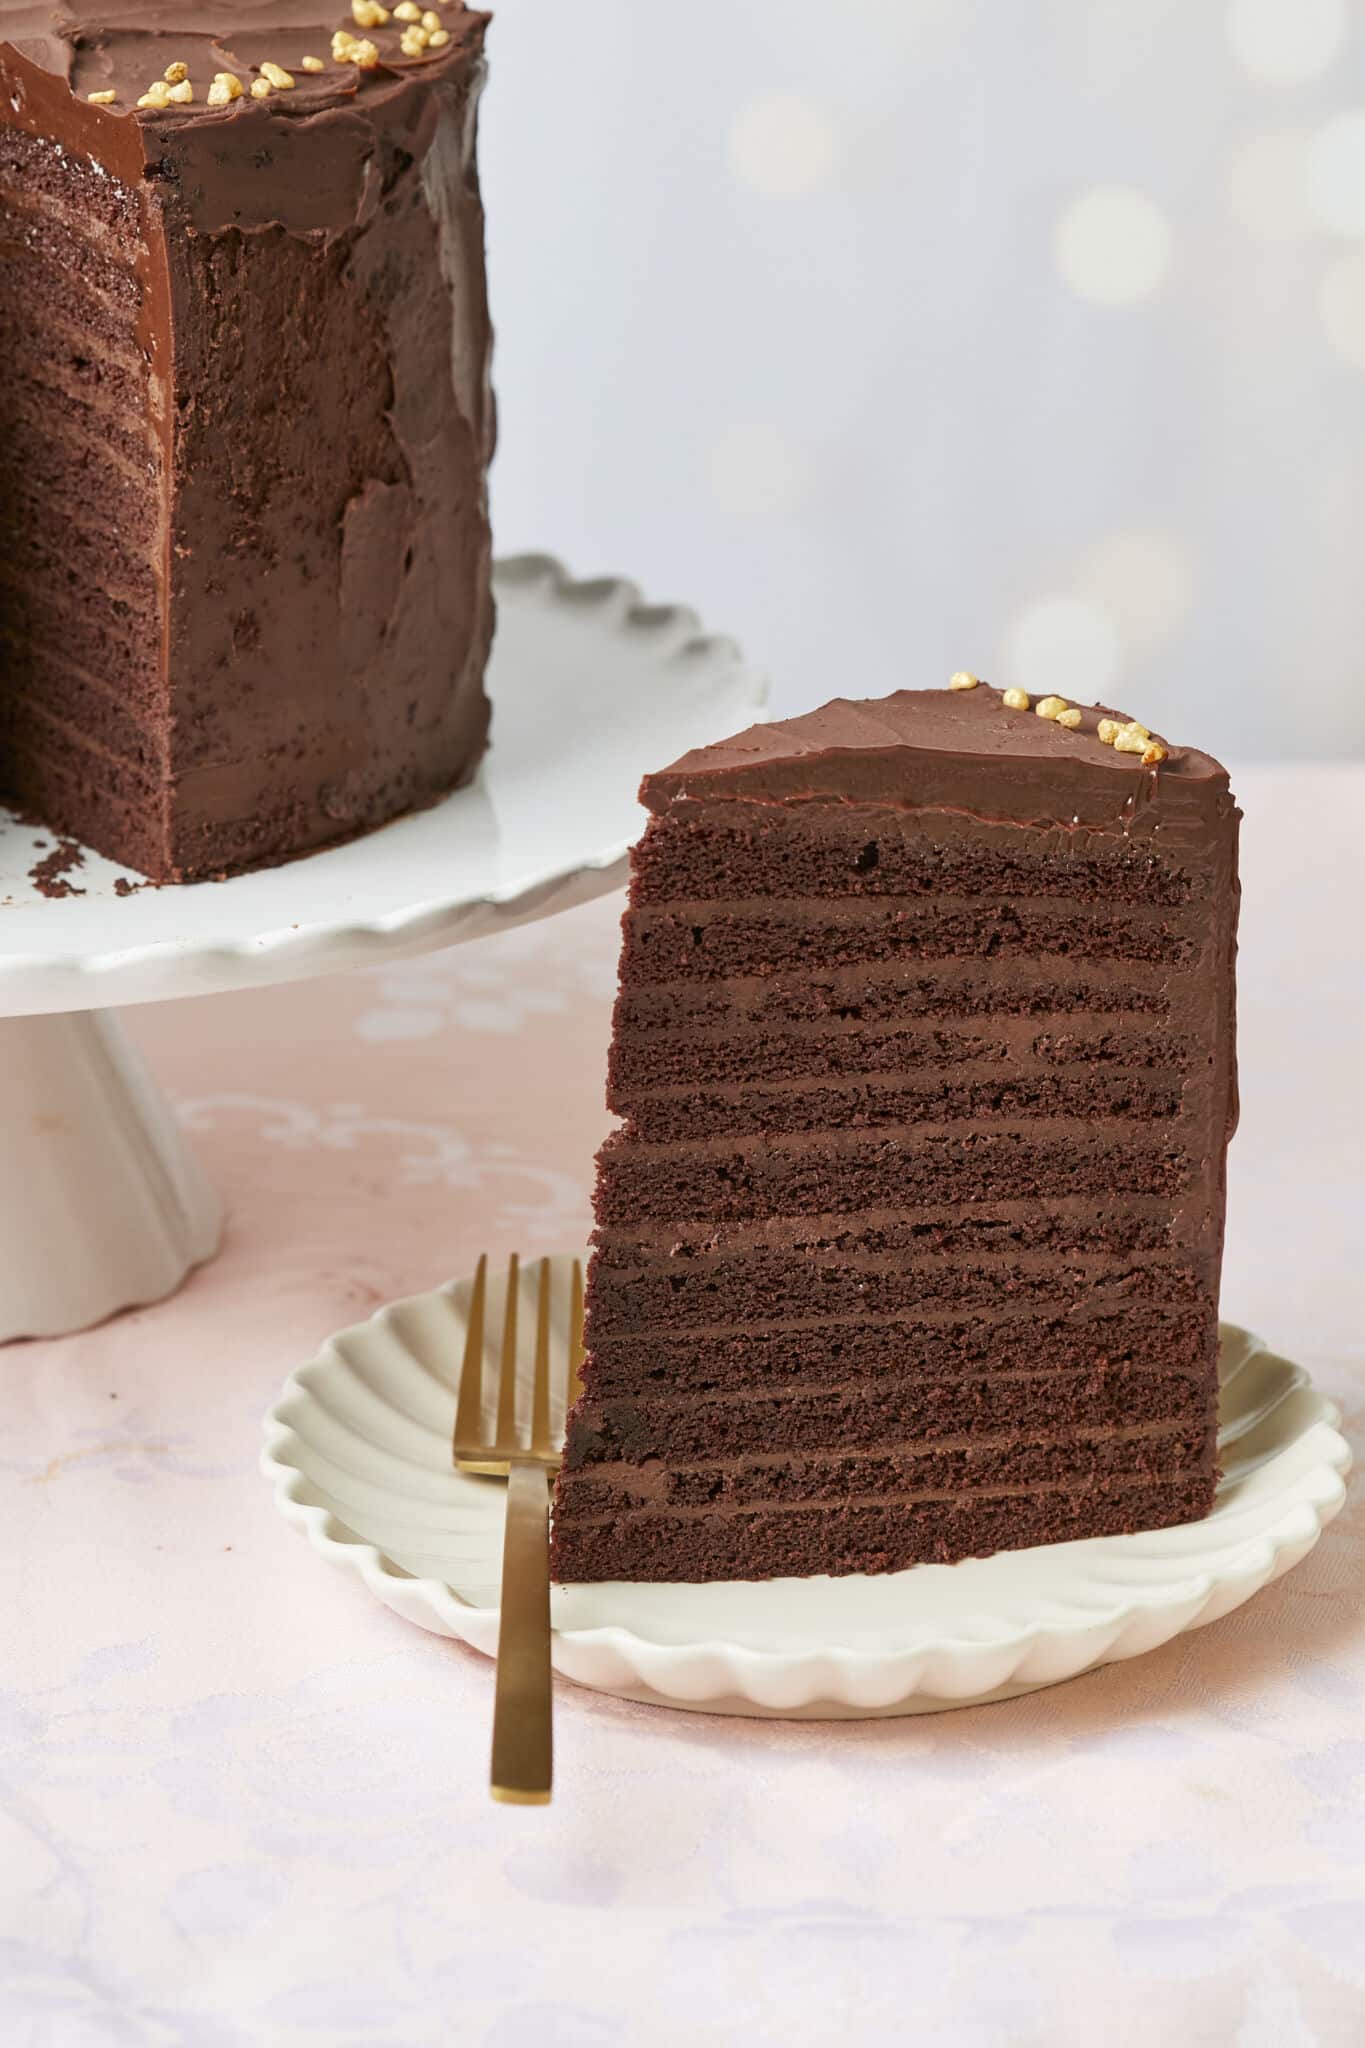 Chocolate Pastry Cream works very well between layers of the impressive 24-Layer Chocolate Cake. 